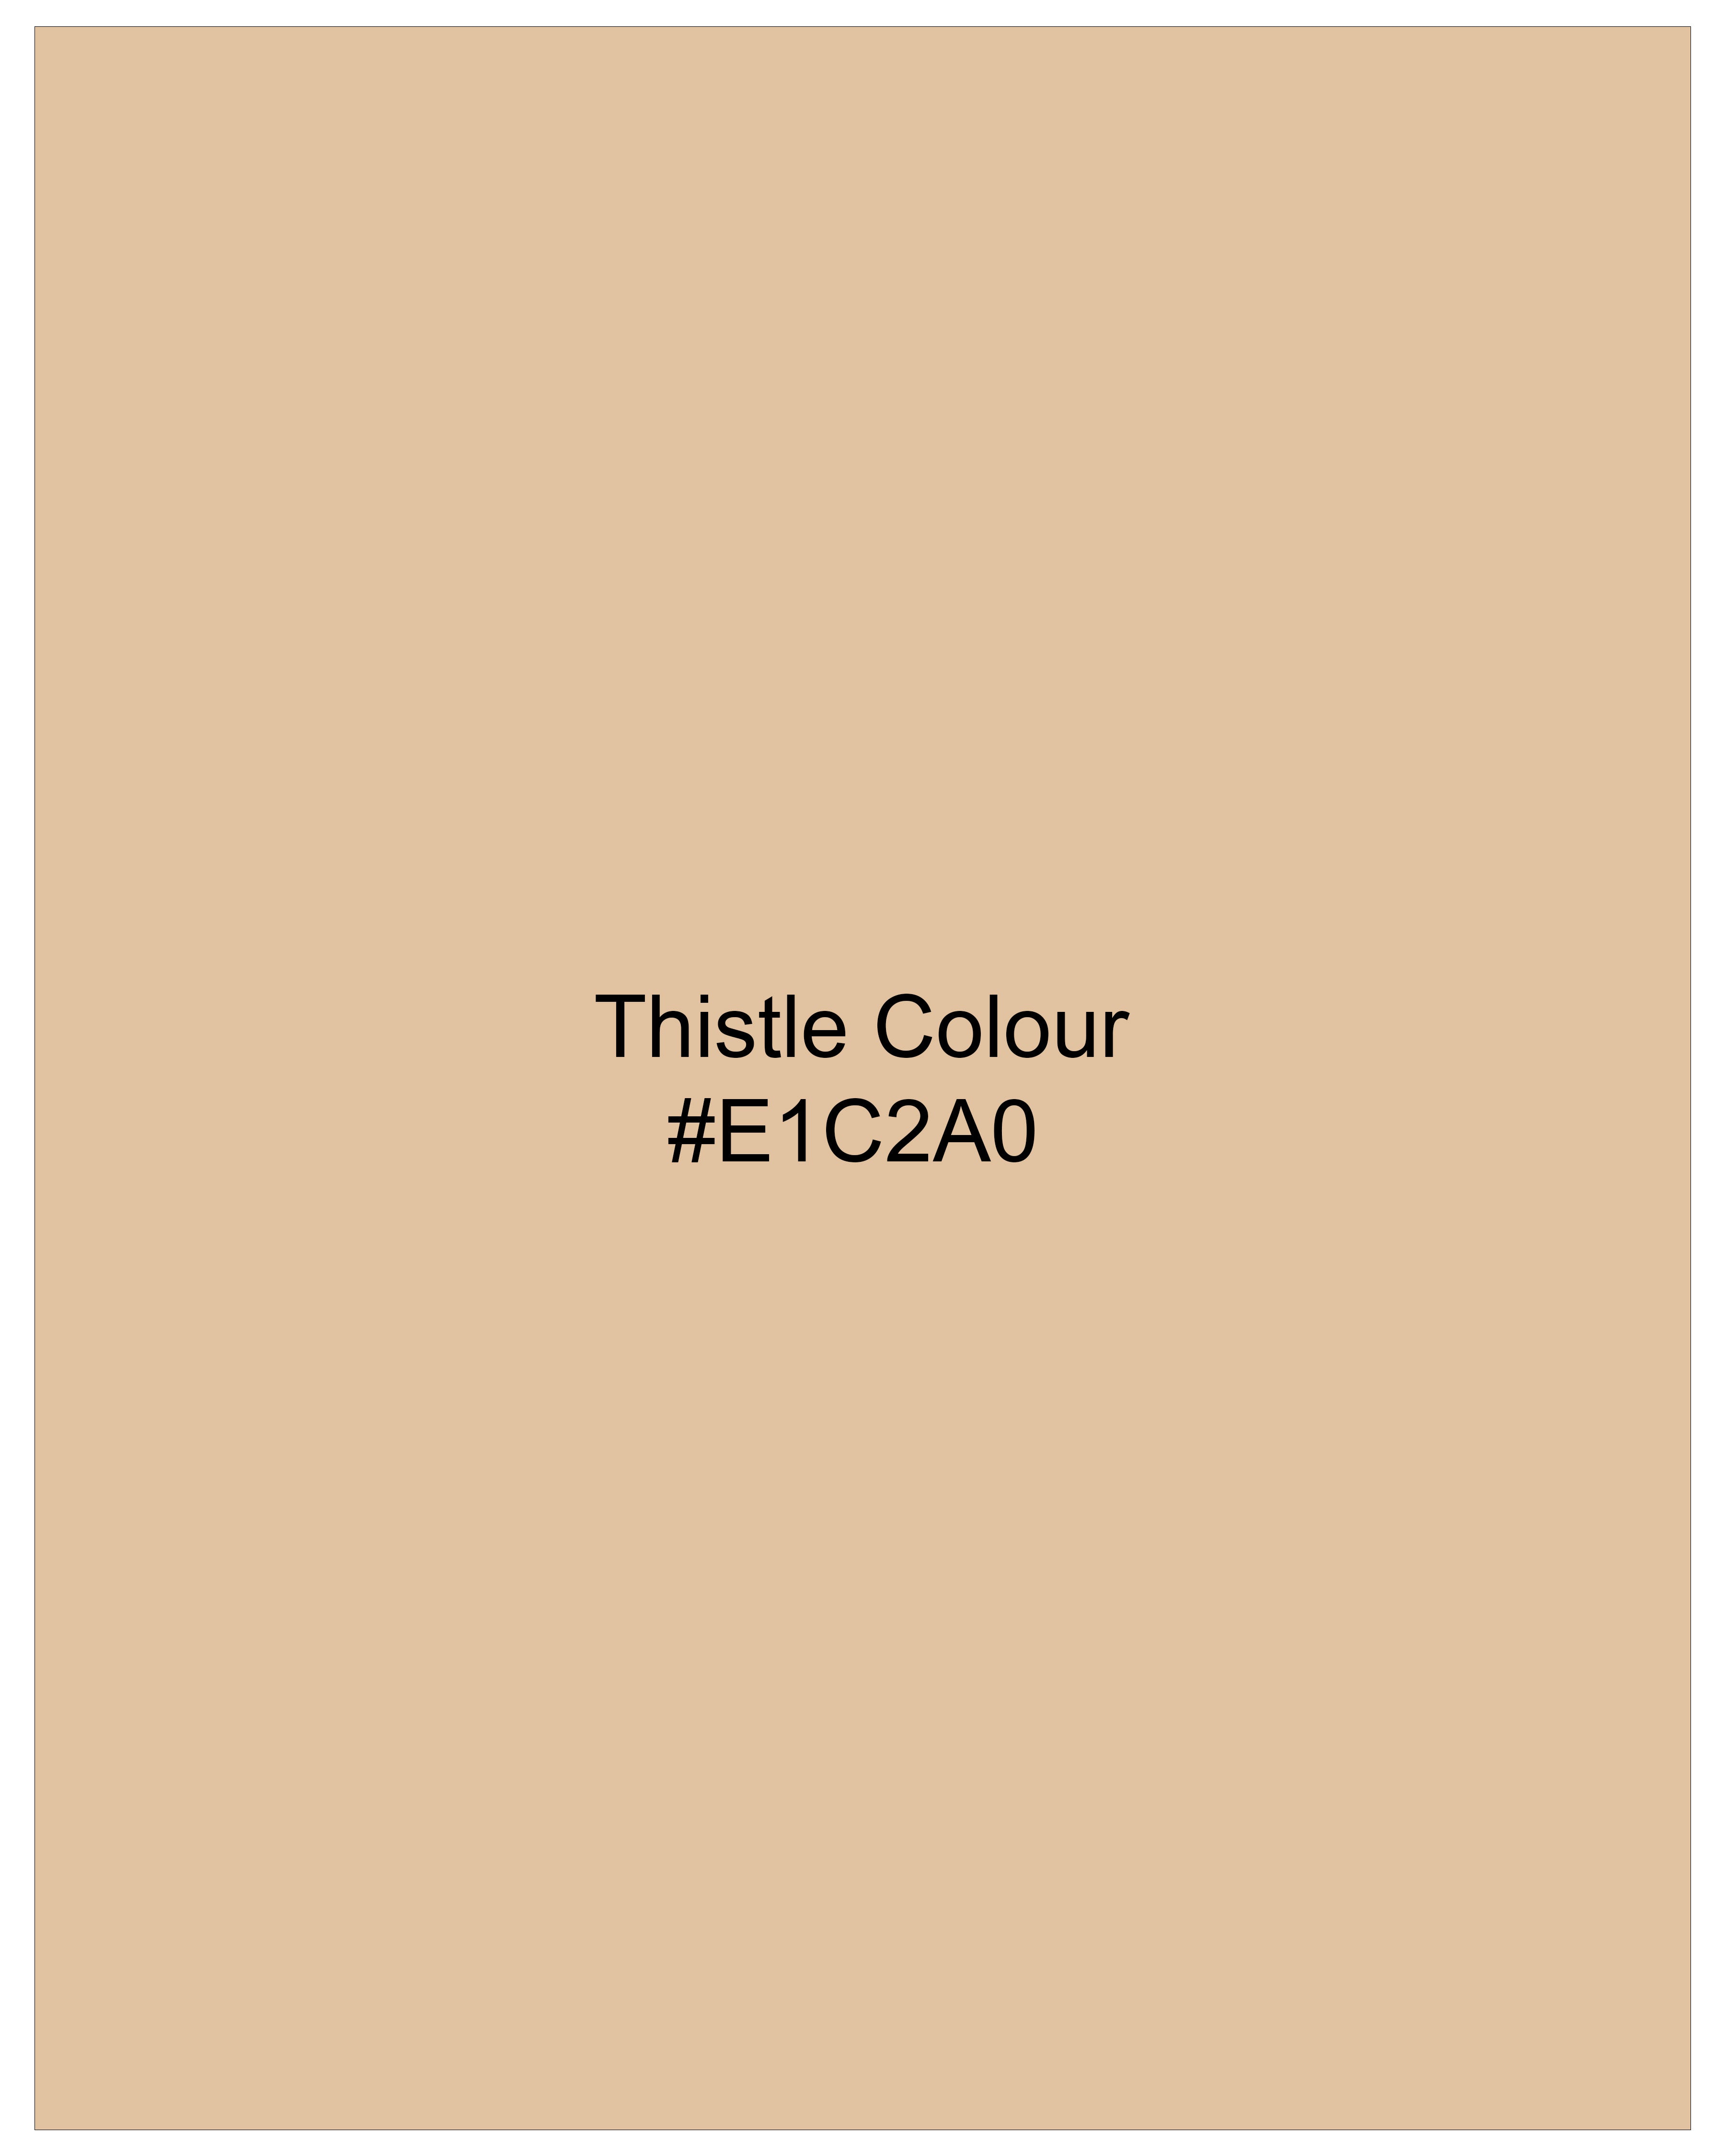 Thistle Brown Dobby Textured Pant T2713-28, T2713-30, T2713-32, T2713-34, T2713-36, T2713-38, T2713-40, T2713-42, T2713-44